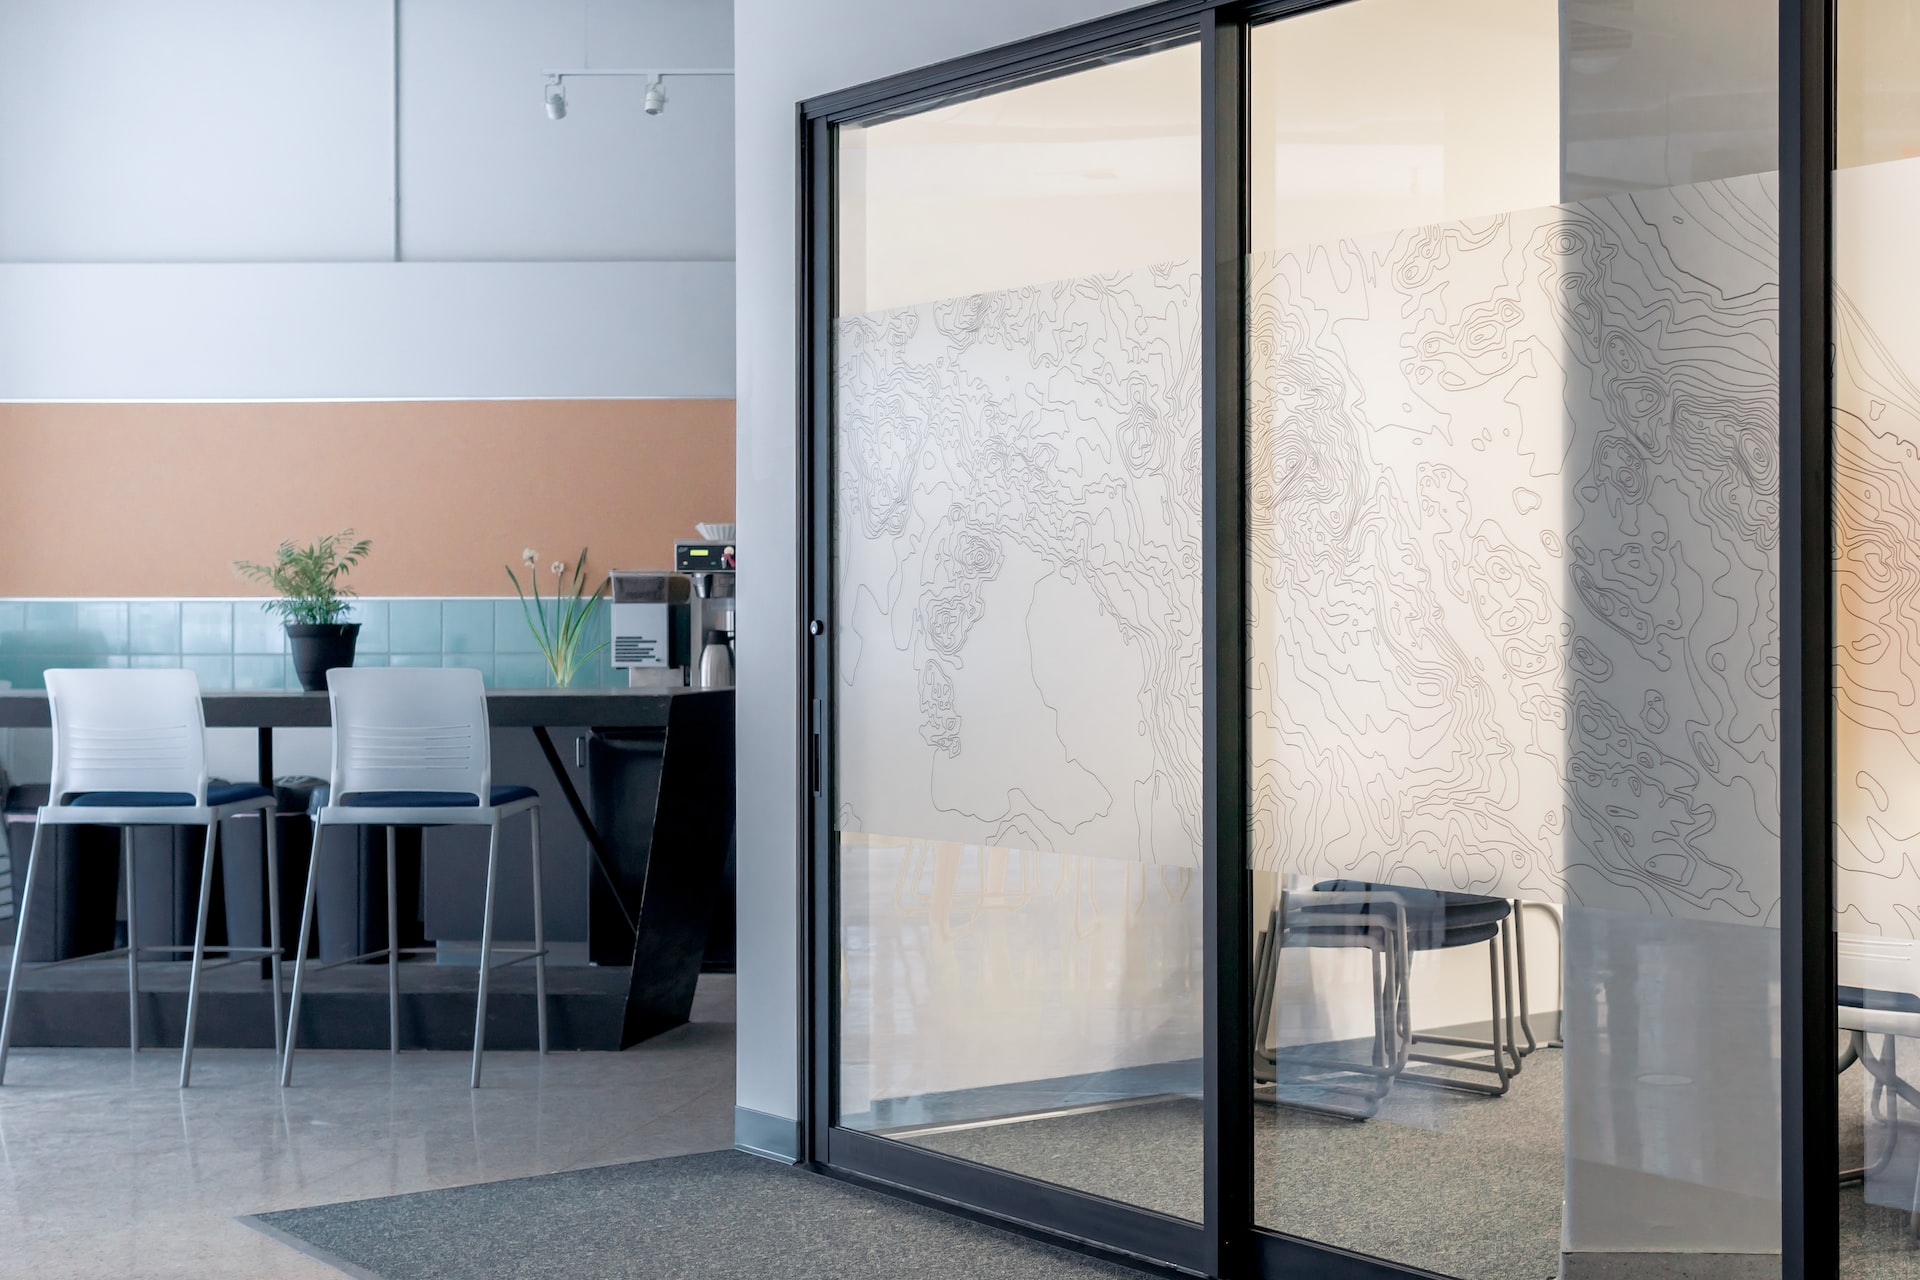 New Automatic Sliding Door Opener Makes Your Home Hands-Free